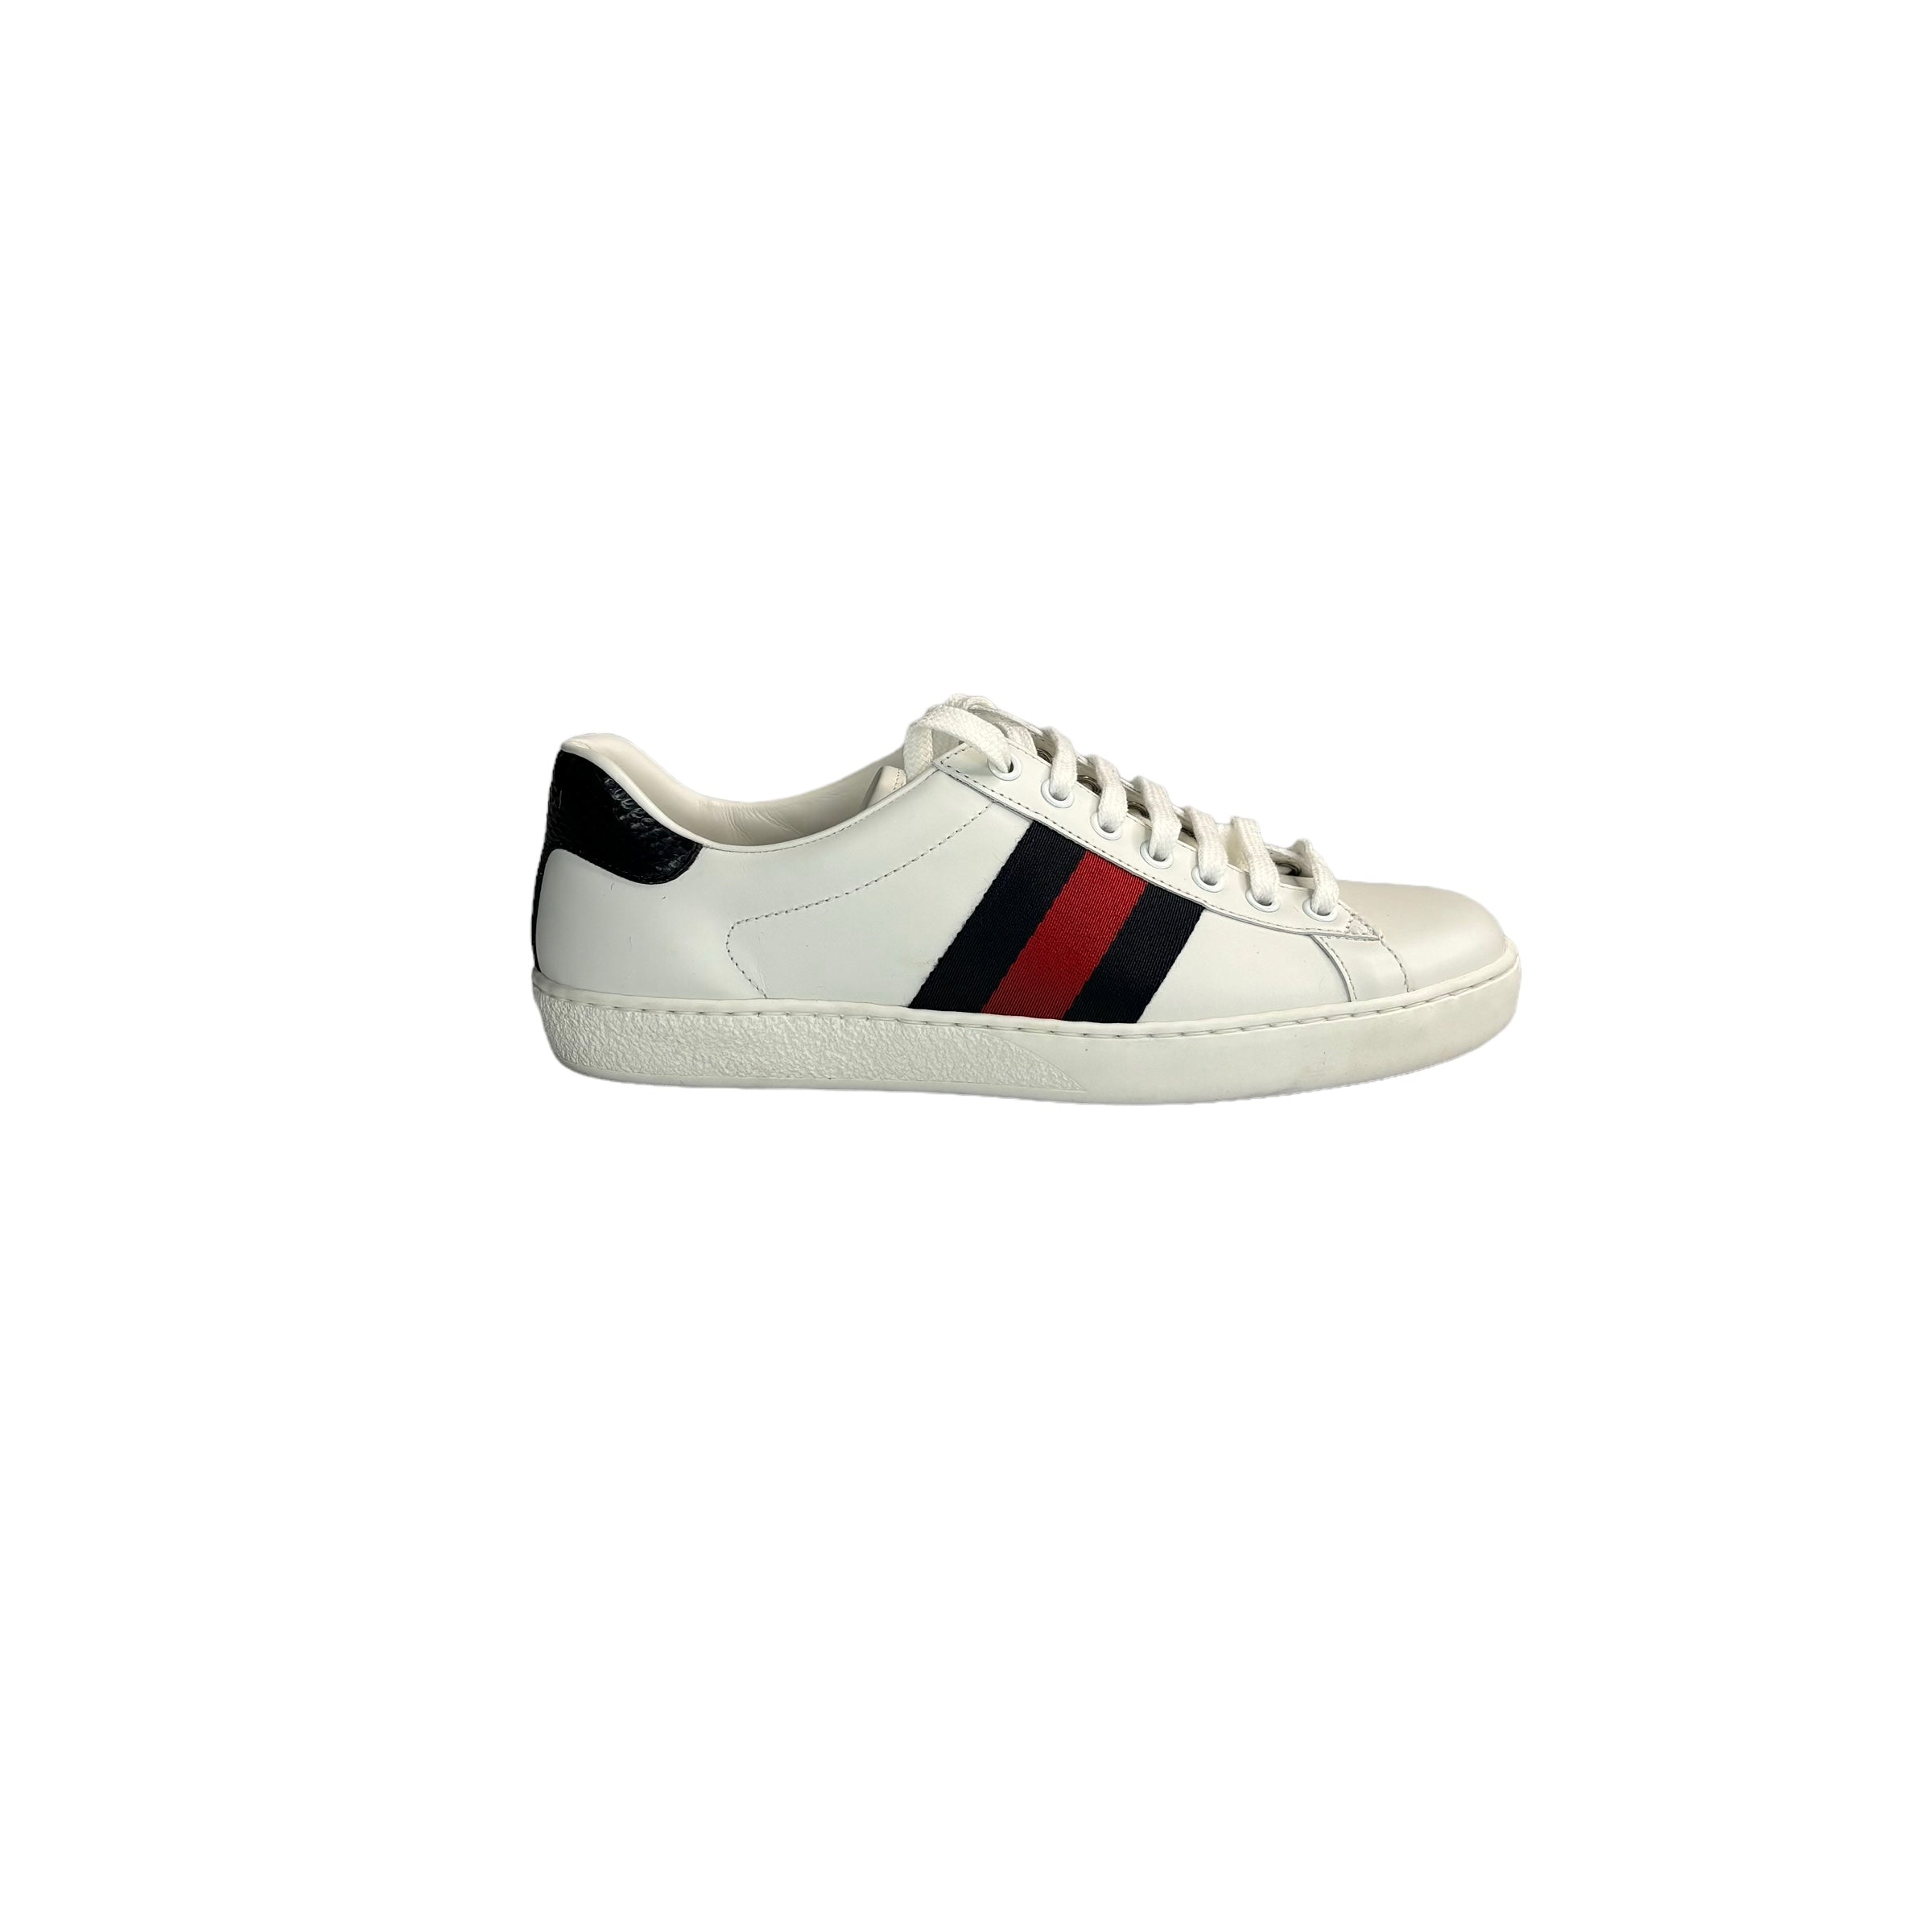 GUCCI Women's New Ace logo-embroidered leather trainers